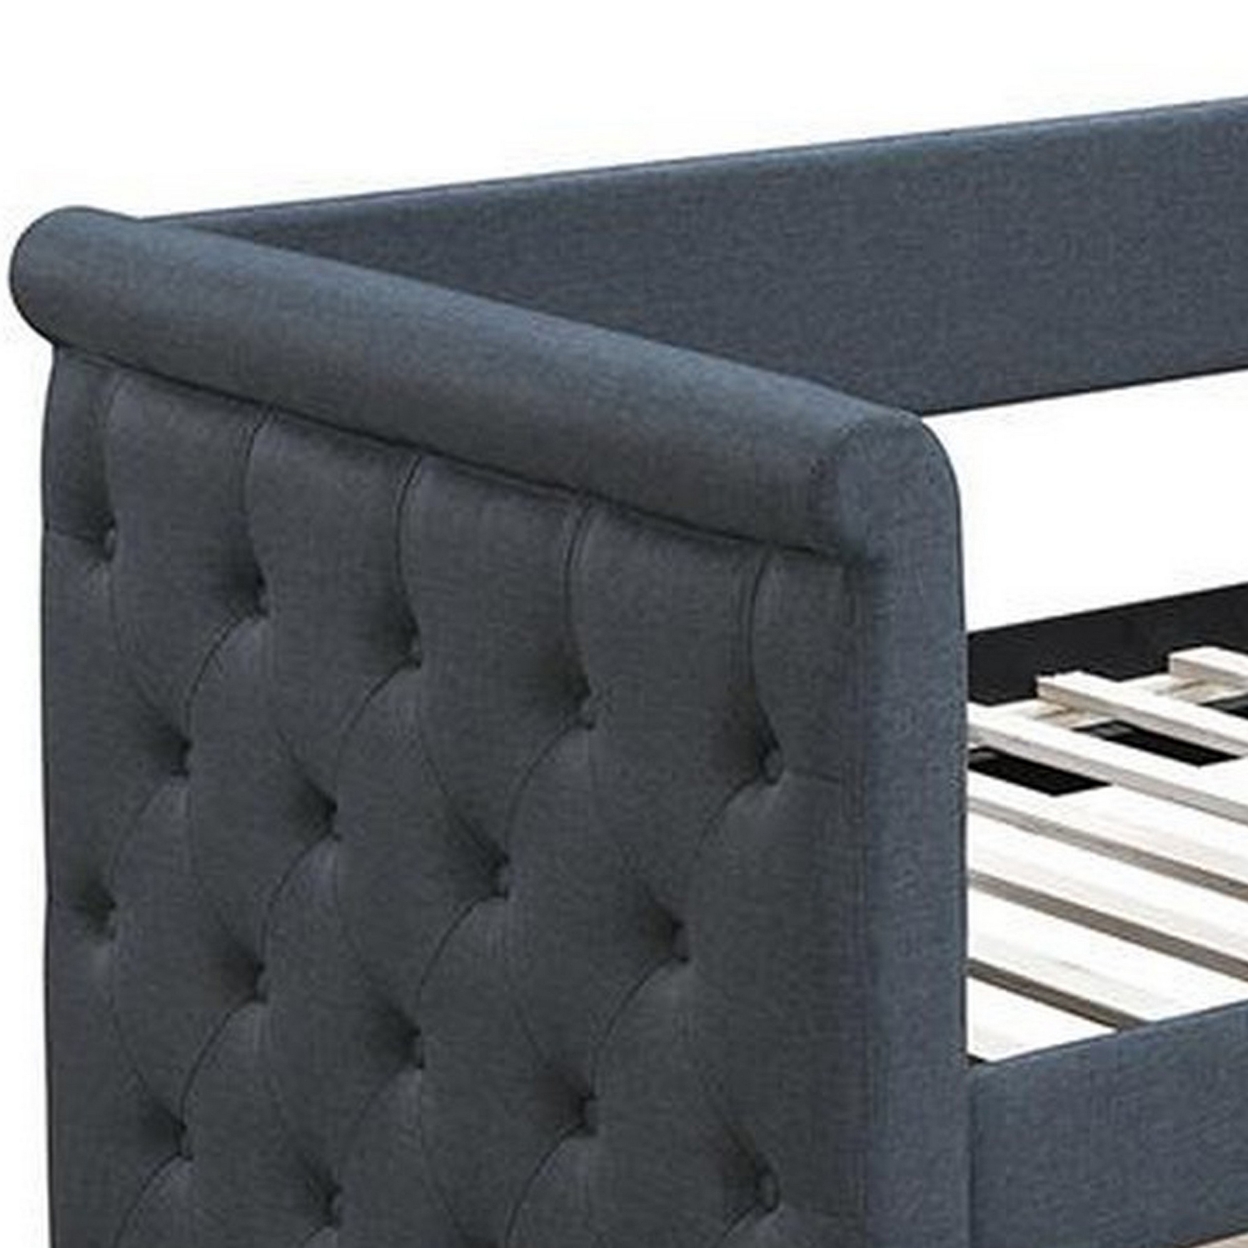 Edra Classic Upholstered Day Bed With Trundle, Tufted Charcoal Gray Burlap- Saltoro Sherpi